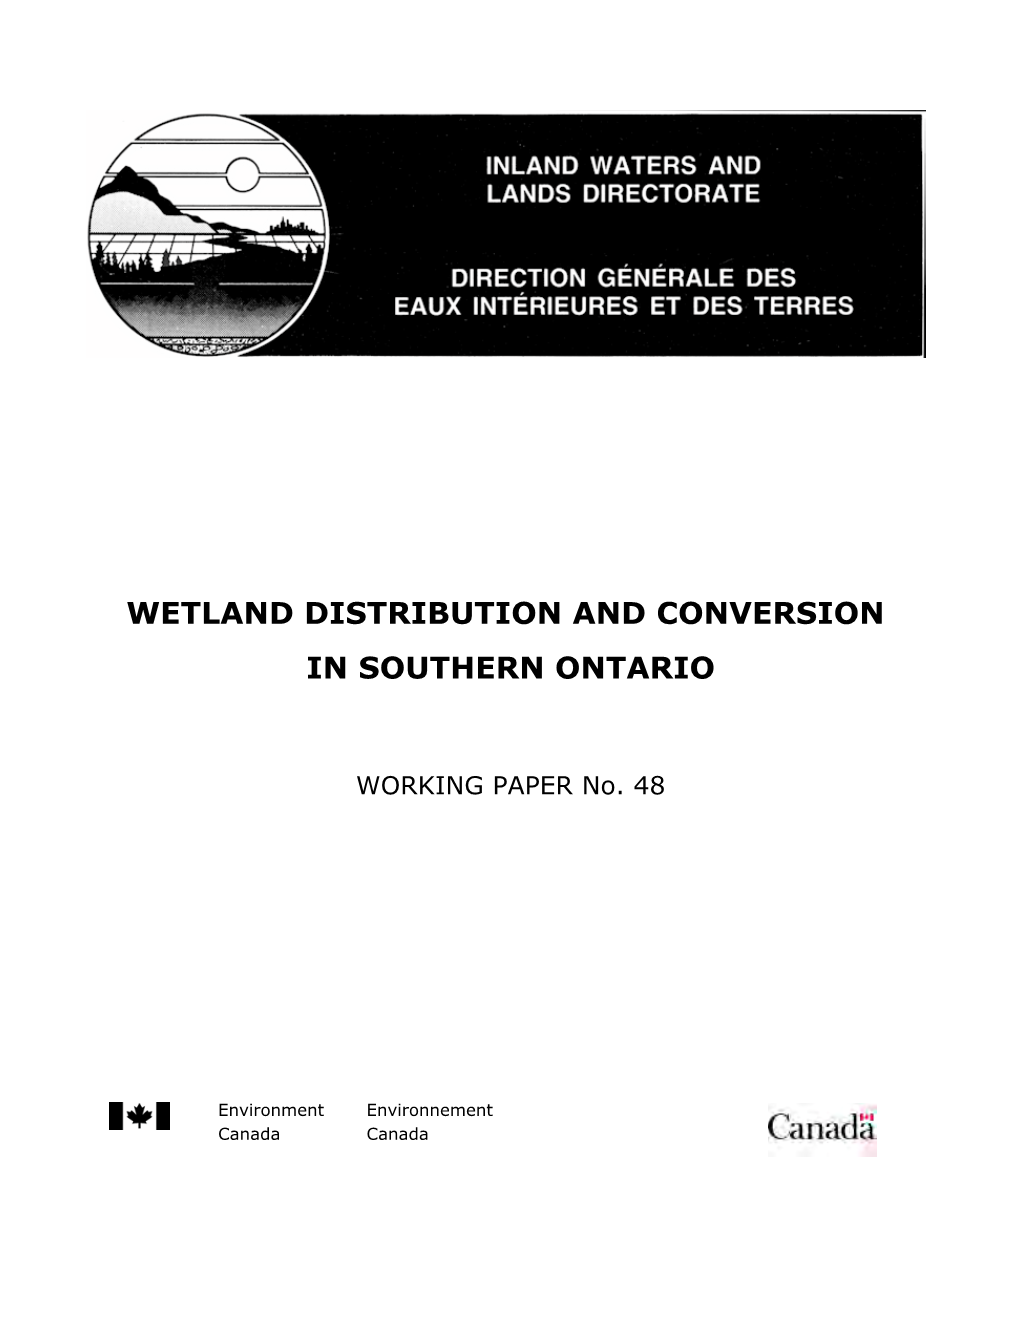 Wetland Distribution and Conversion in Southern Ontario